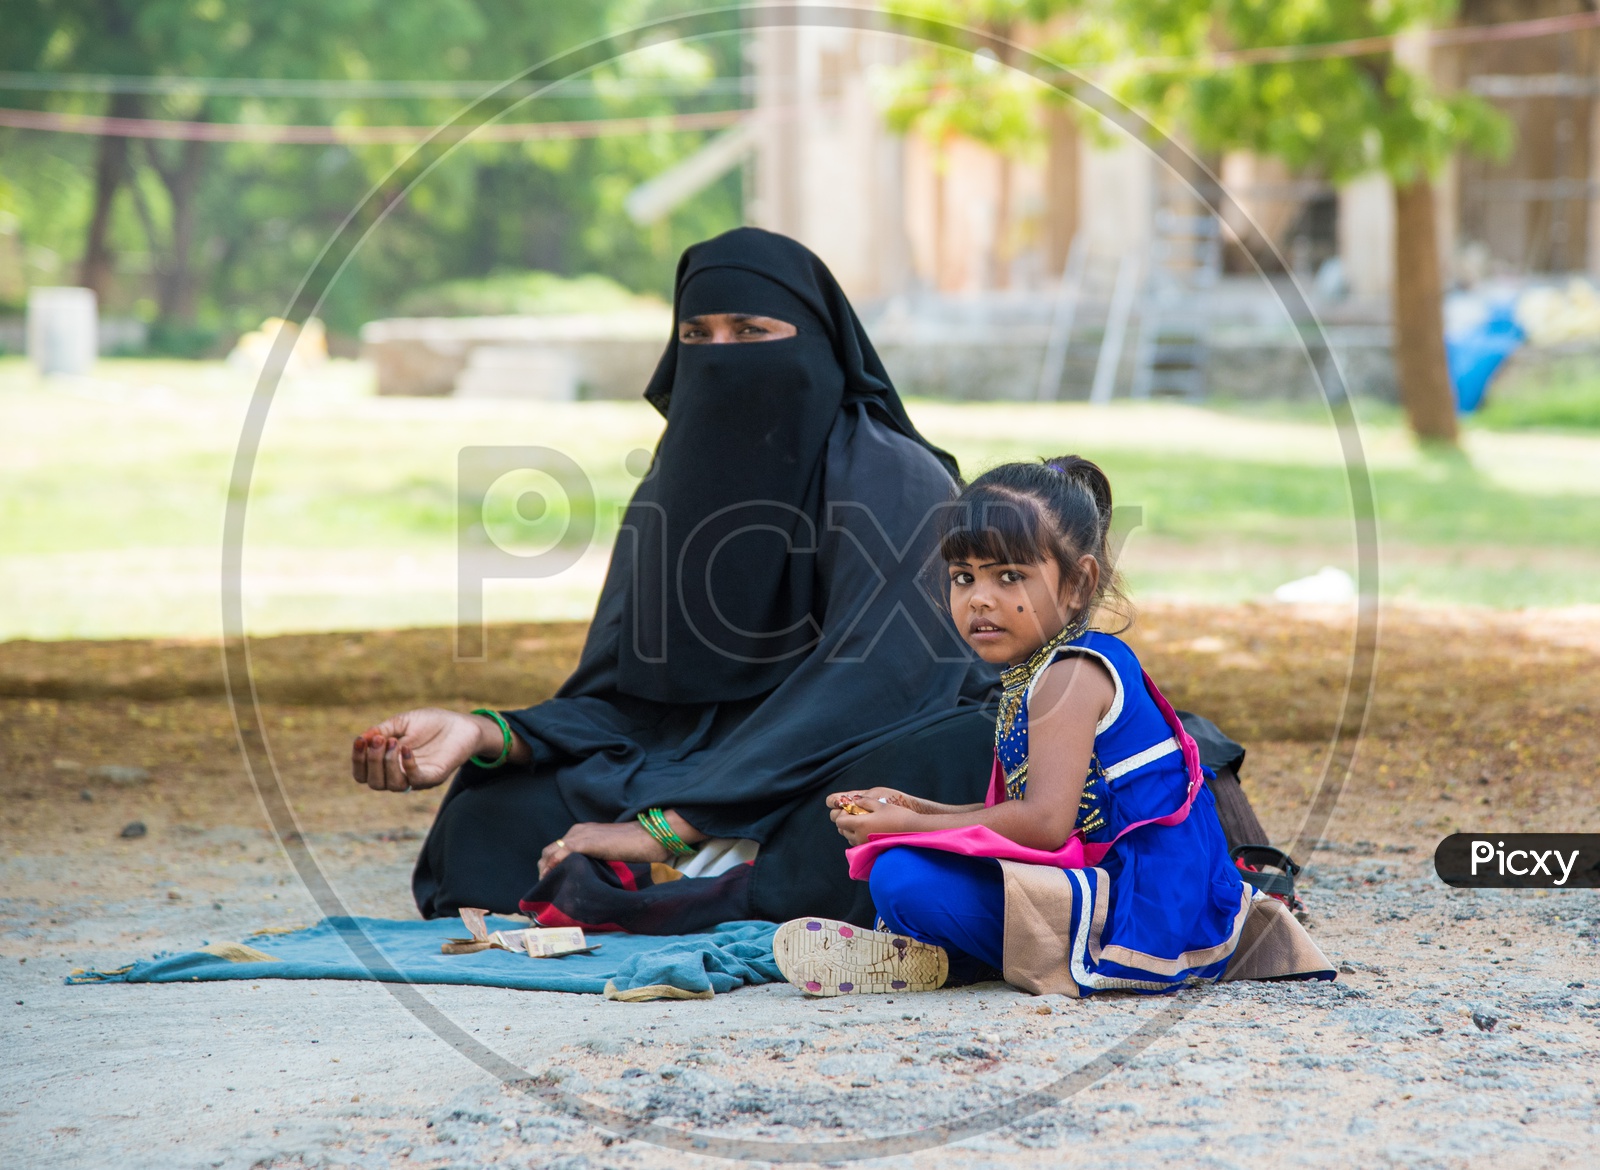 A lady with her child seeking alms during Eid in Hyderabad